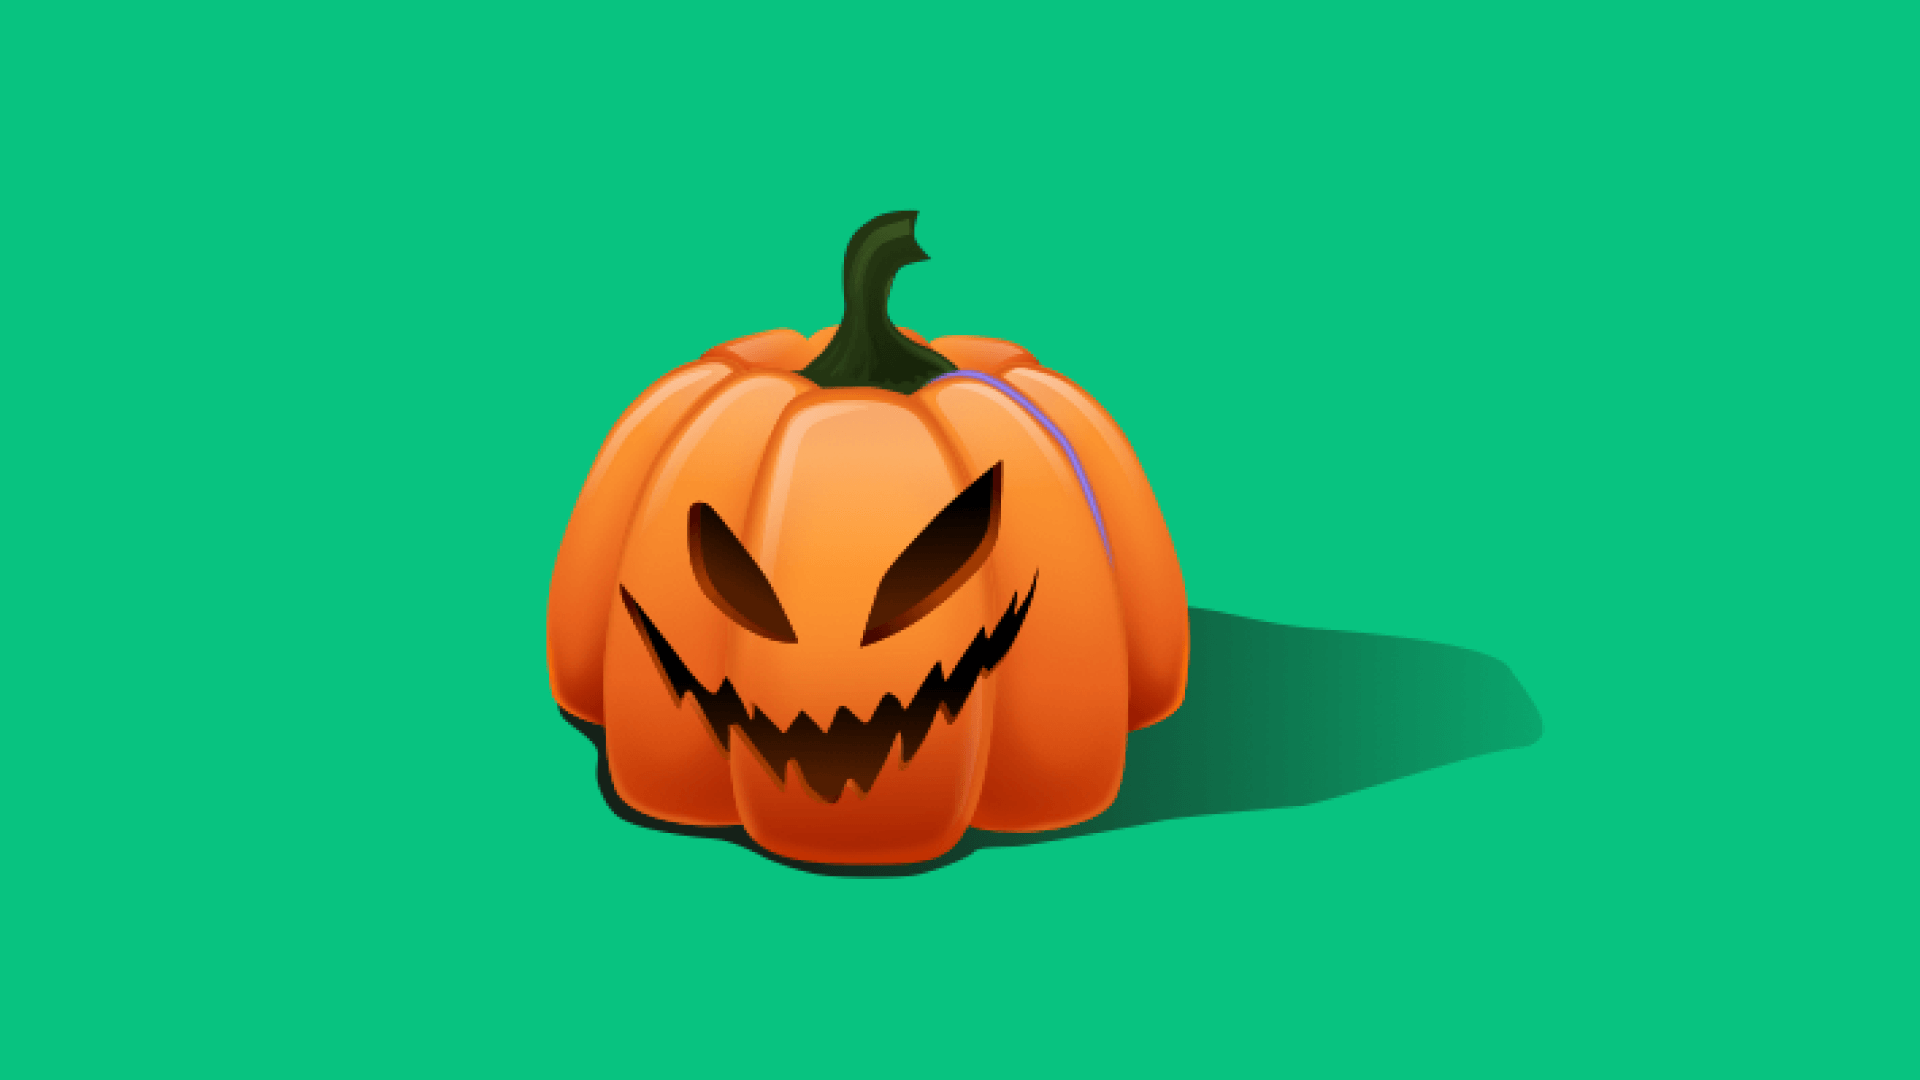 Trick or treat: celebrate spooky season with free design assets | Linearity